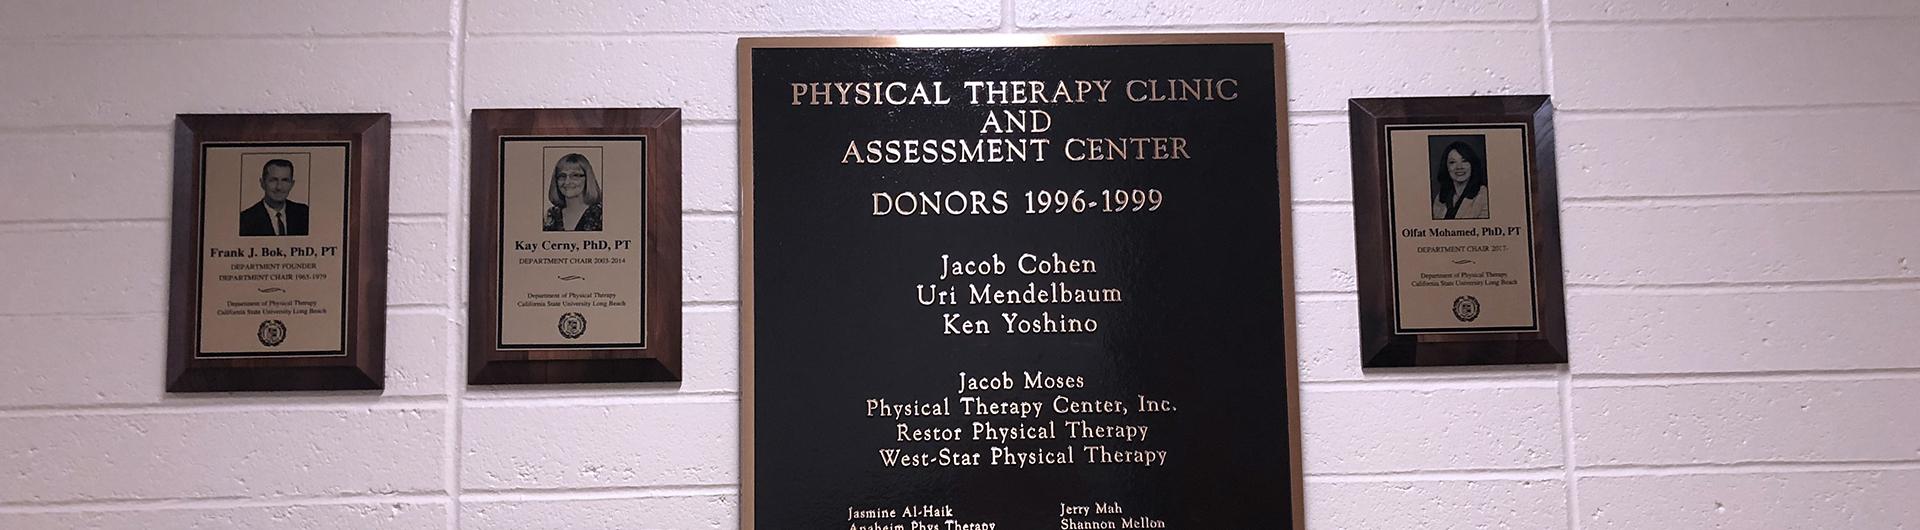 Physical therapy clinic and assessment center